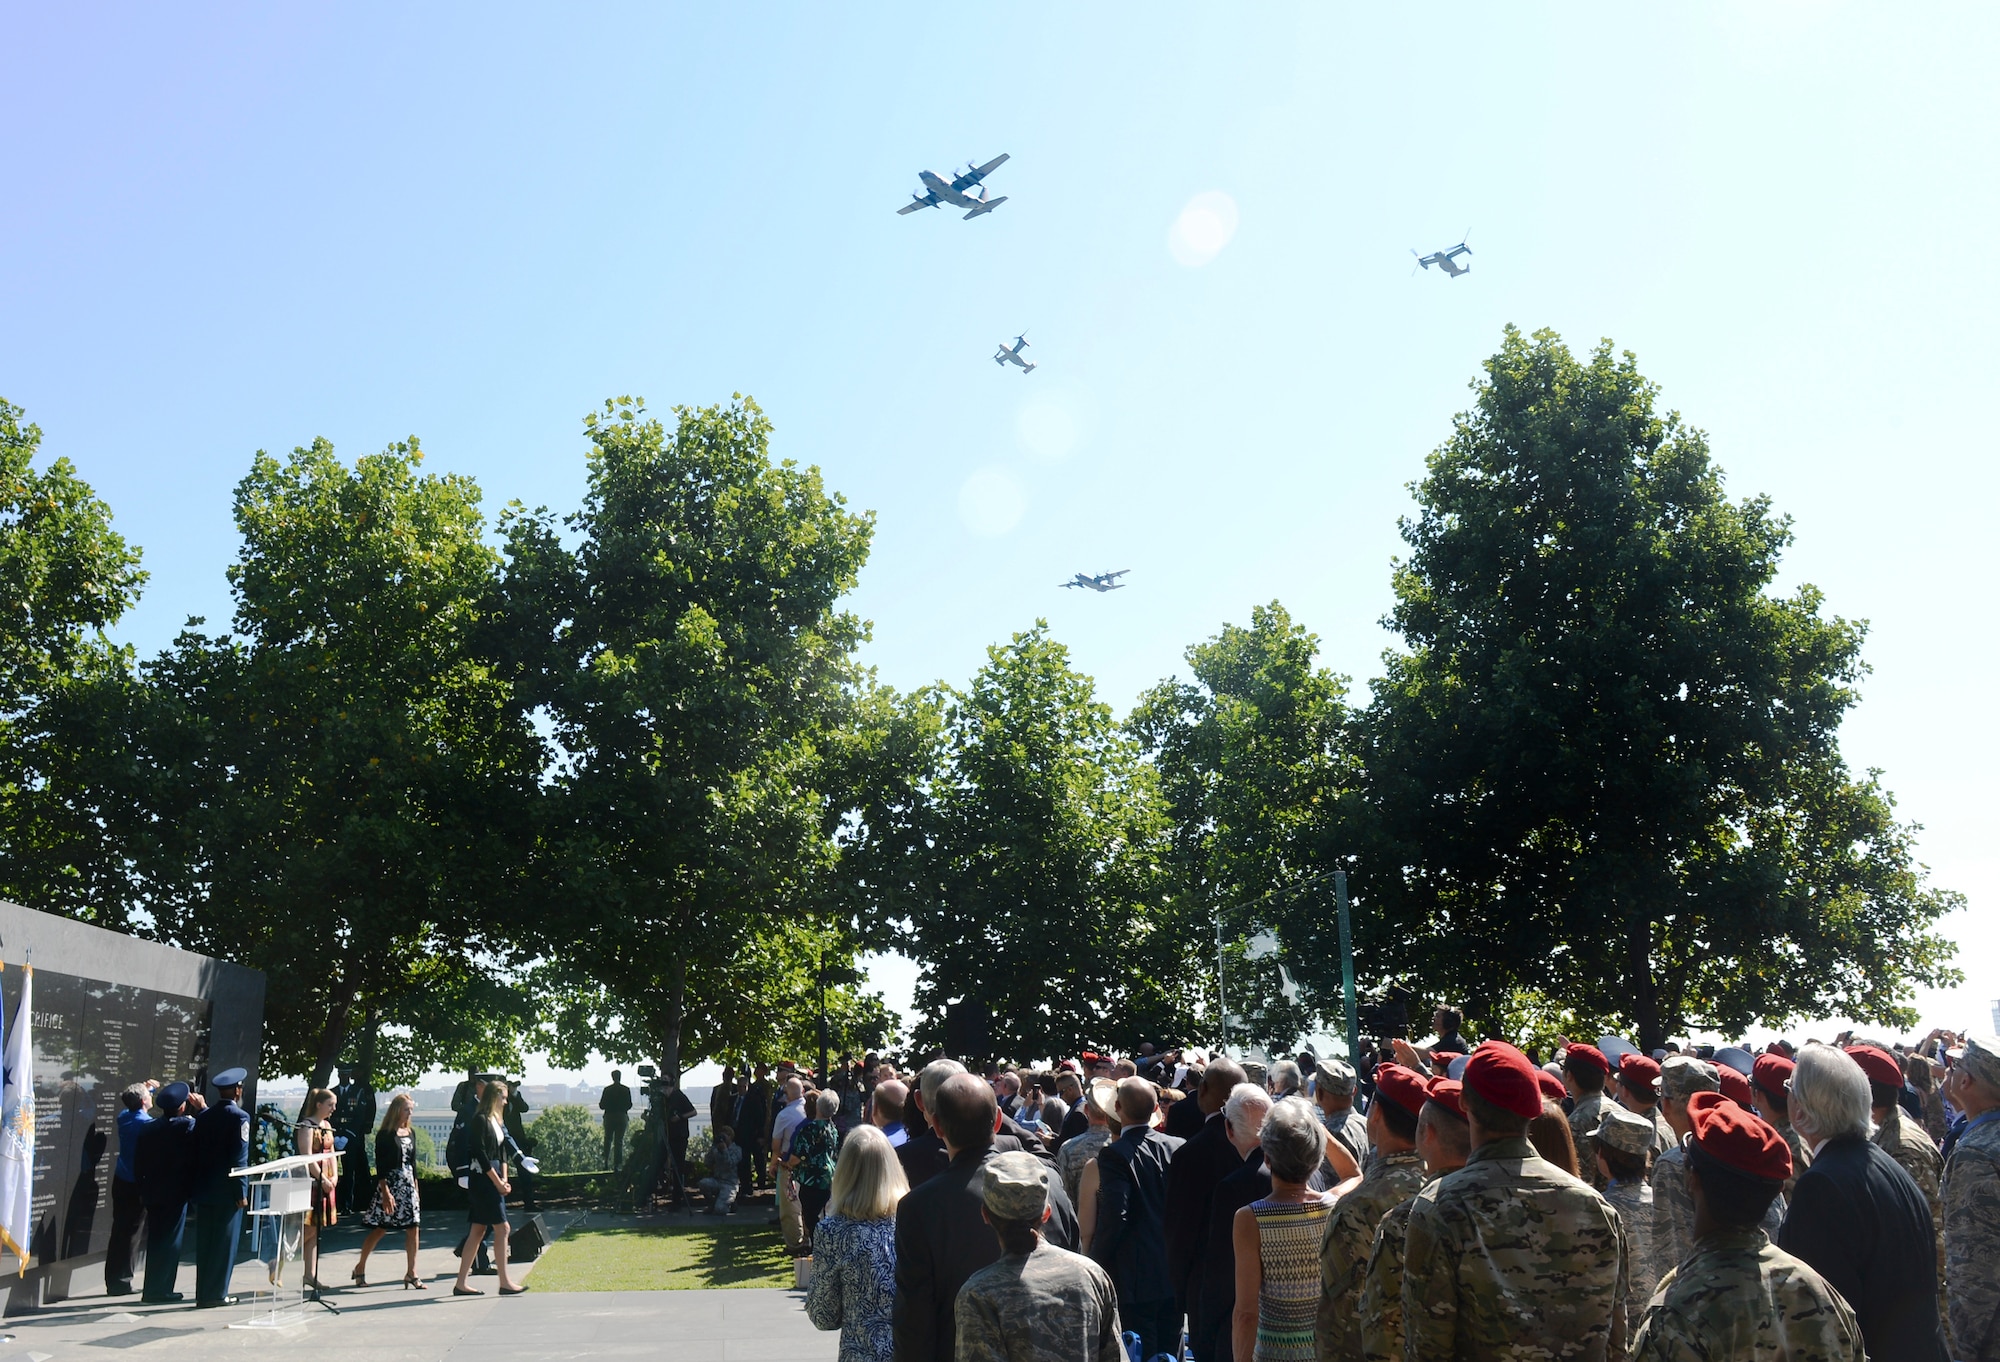 A missing man formation flies over Master Sgt. John Chapman’s name unveiling ceremony at the Air Force Memorial in Arlington, Va., Aug. 24, 2018. Chapman was posthumously awarded the Medal of Honor for actions on Takur Ghar Mountain in Afghanistan March 4, 2002. An elite special operations team was ambushed by the enemy and came under heavy fire from multiple directions. Chapman immediately charged an enemy bunker through thigh-deep snow and killed all enemy occupants. Courageously moving from cover to assault a second machine gun bunker, he was injured by enemy fire. Despite severe wounds, he fought relentlessly, sustaining a violent engagement with multiple enemy personnel before making the ultimate sacrifice. With his last actions he saved the lives of his teammates. (U.S. Air Force photo by Staff Sgt. Chad Trujillo)